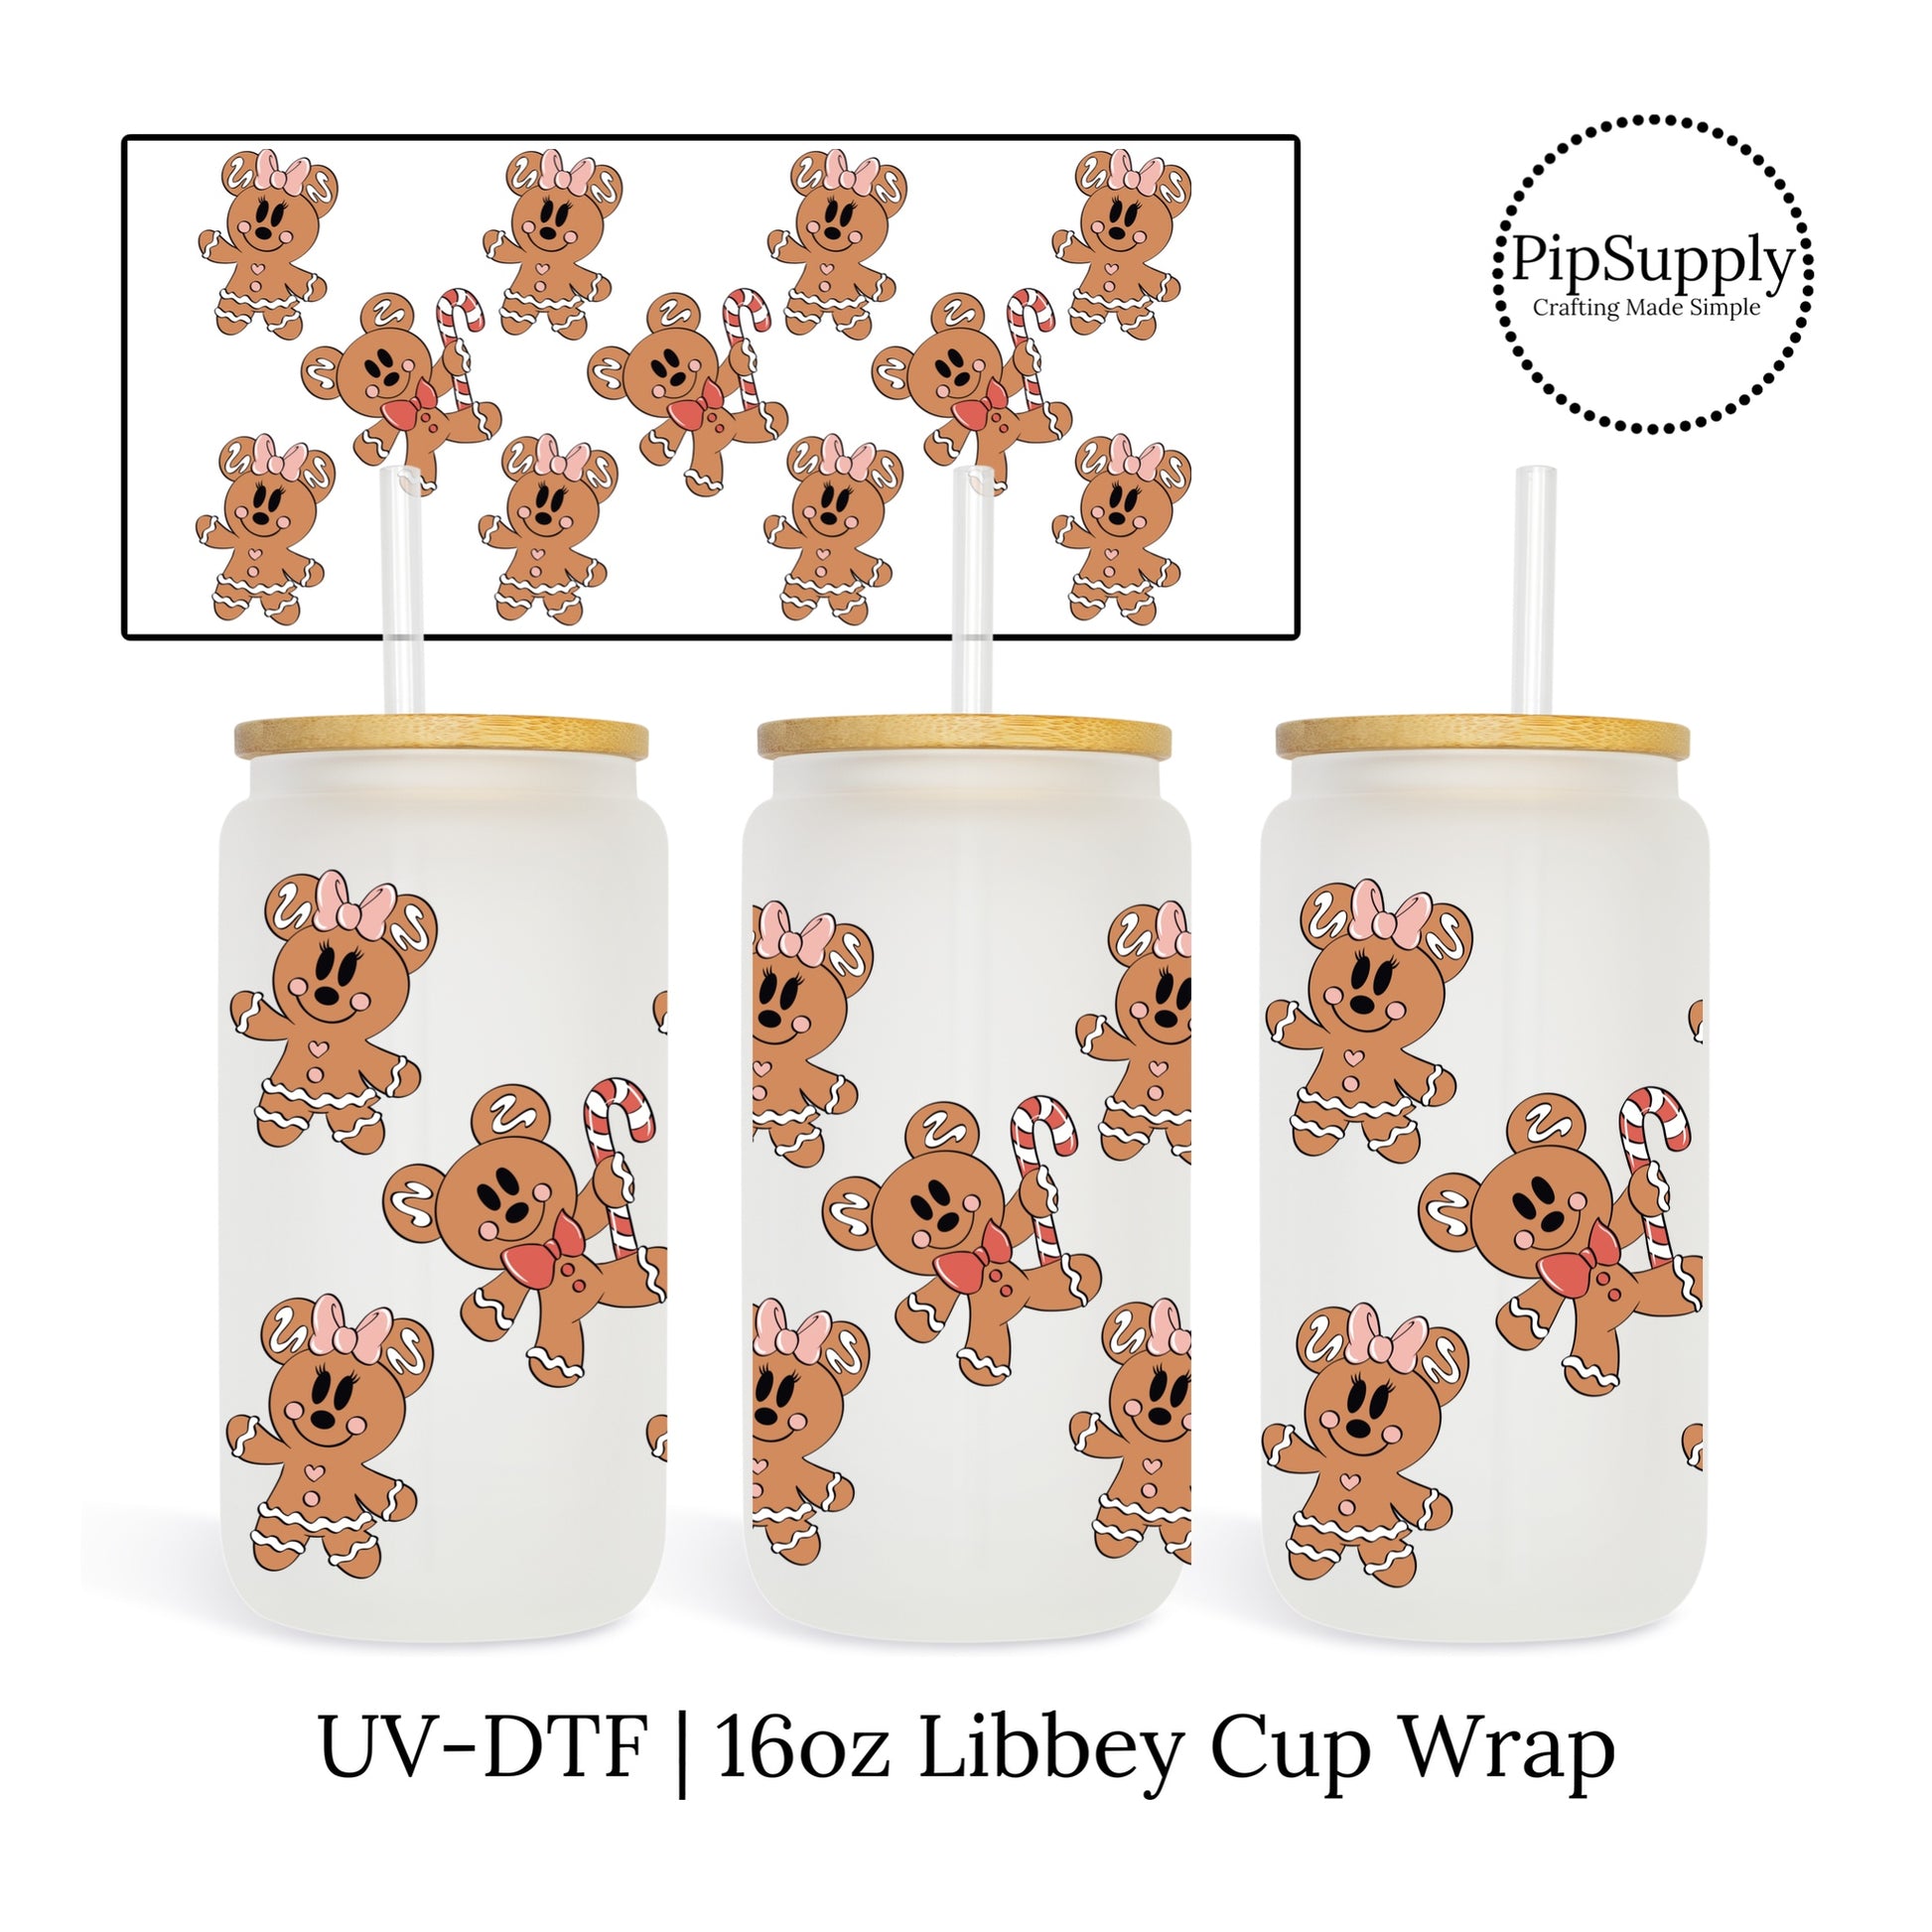 My darling Creates Gingerbread Mice Christmas Ready to Apply Transfer 16 oz. Libbey Cup Wrap